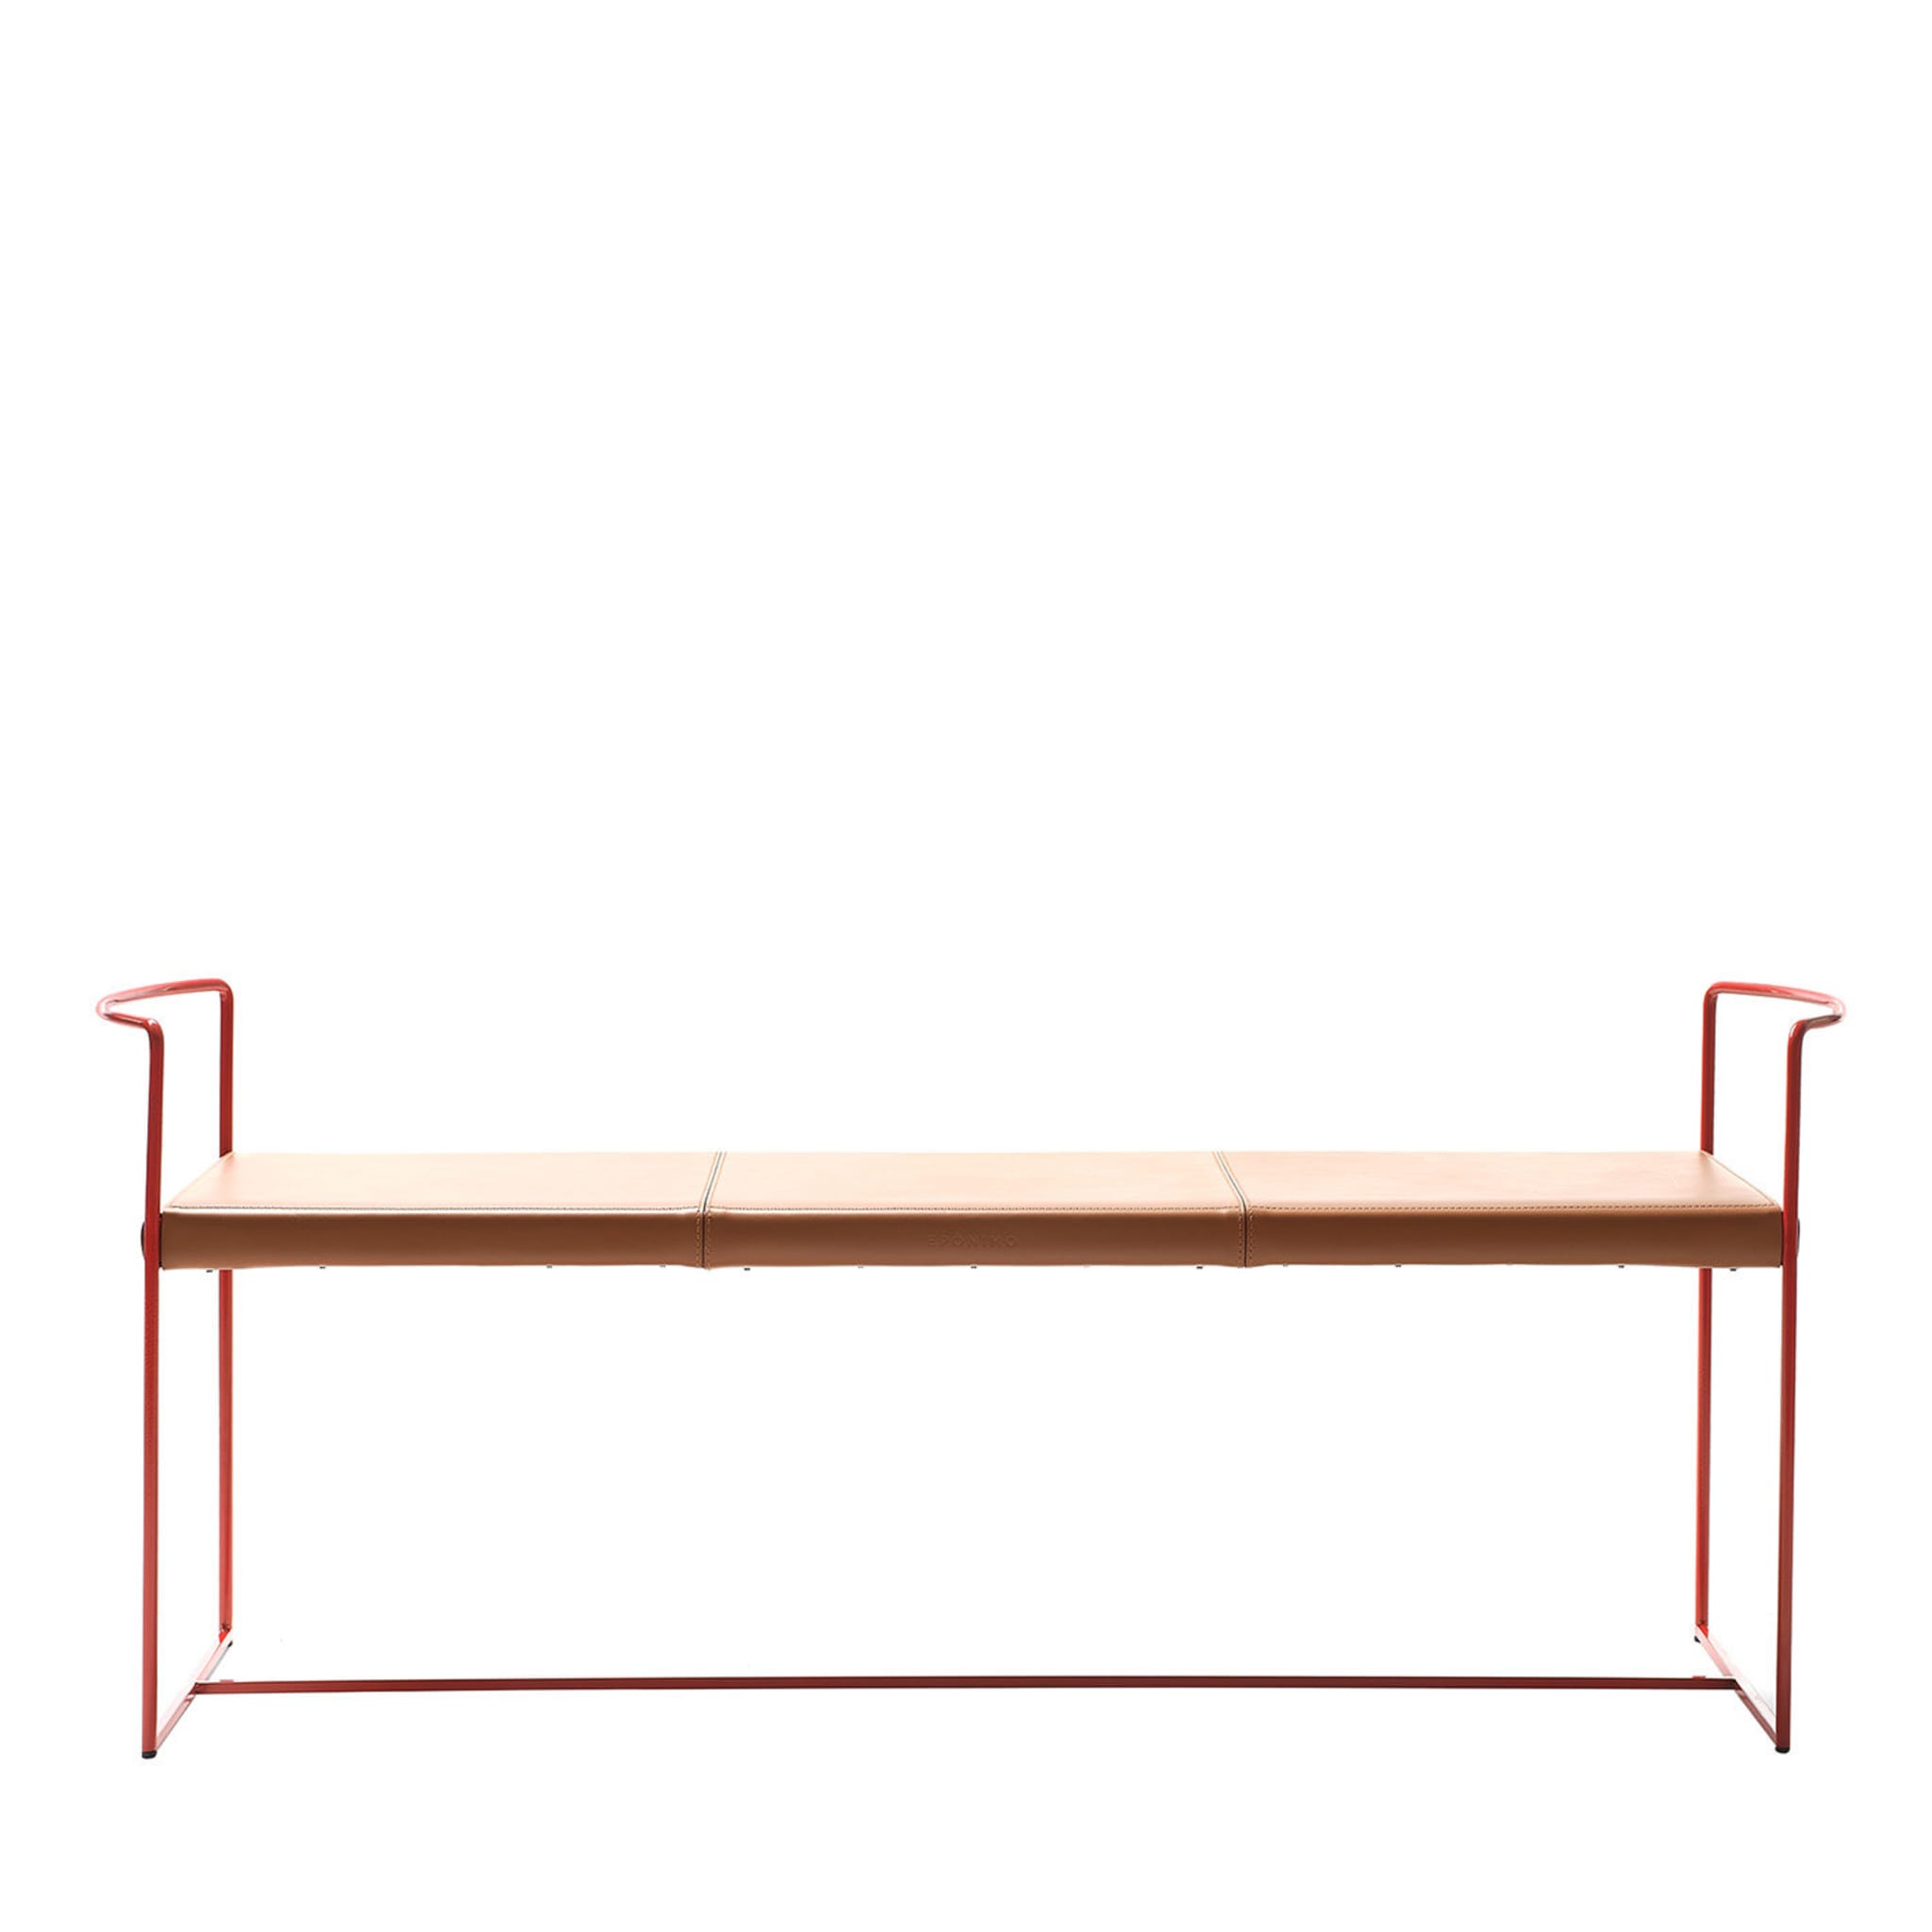 New Outline Red Bench by Alberto Colzani - Main view